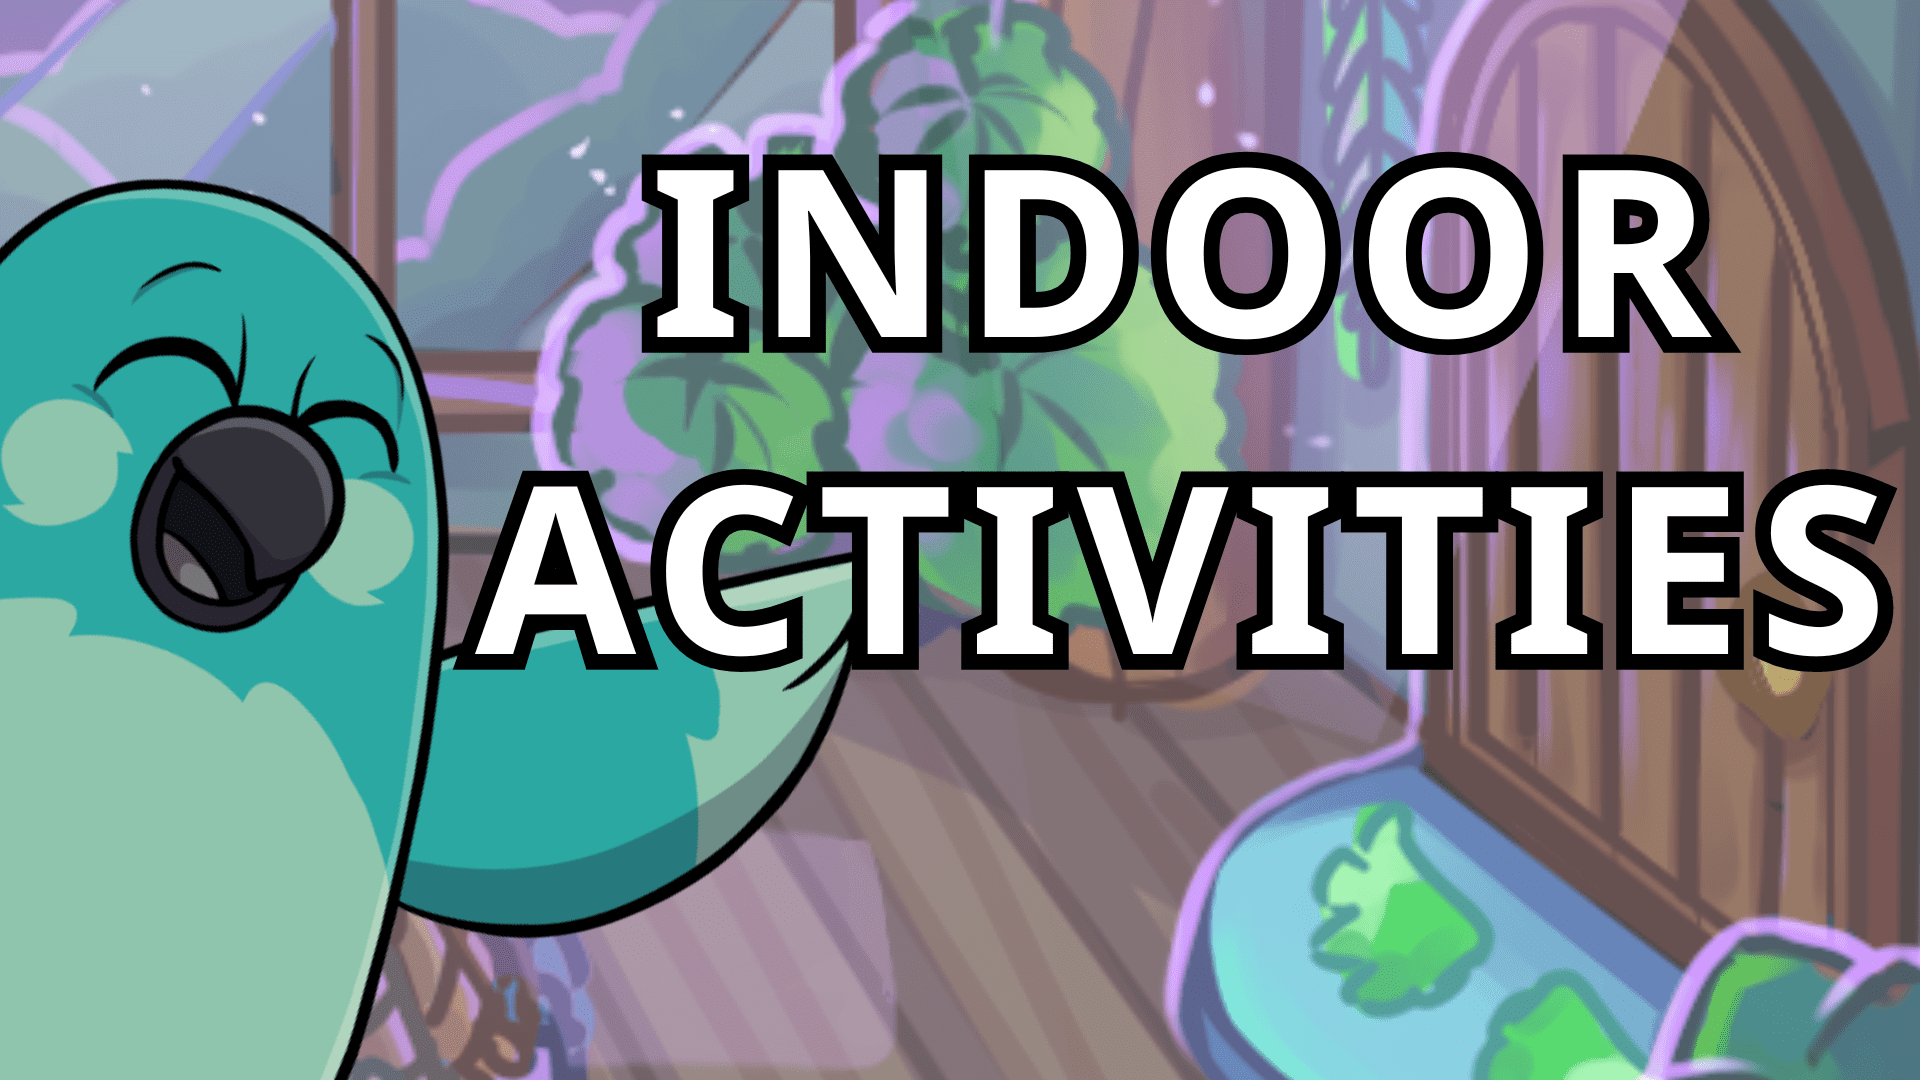 A teal parrot holds text saying "Indoor activities" with a clothing shop background with a window, wooden door, and wooden floor. This depicts our list of indoor games for kids.